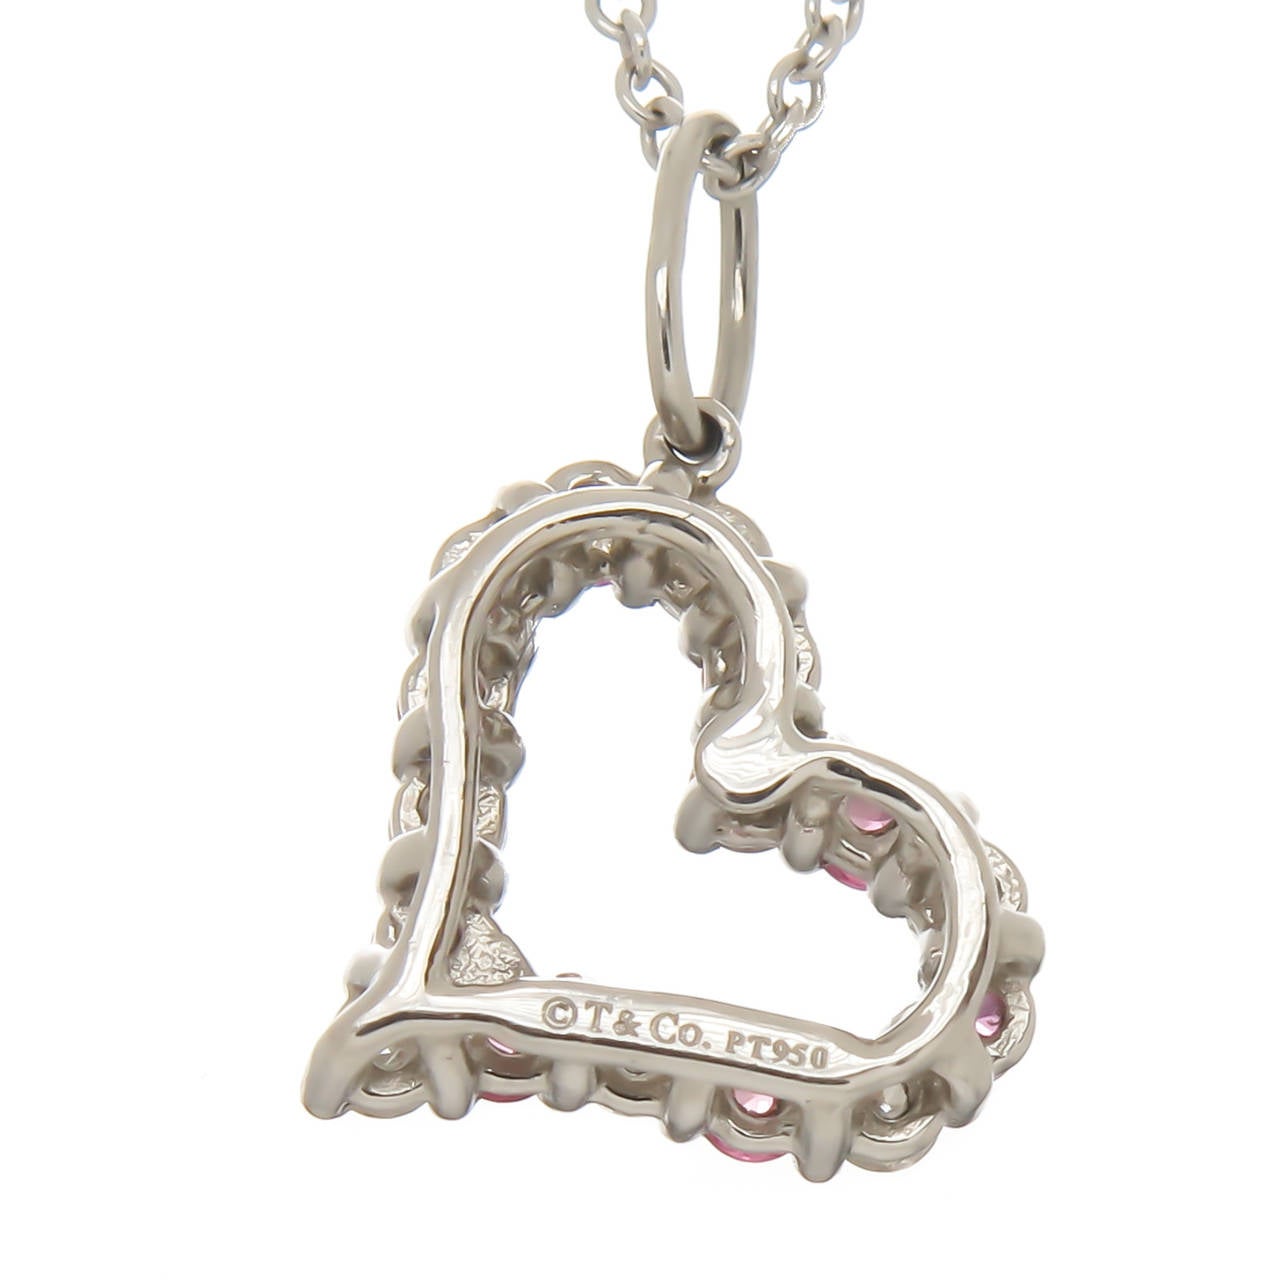 Circa 2014 Tiffany & Company Platinum open heart Pendant, set with Round Brilliant cut Diamonds and pink Sapphires, Suspended from an 18K White Gold Tiffany Chain. Pendant measures 1/2 Inch. Original Tiffany Presentation Box.